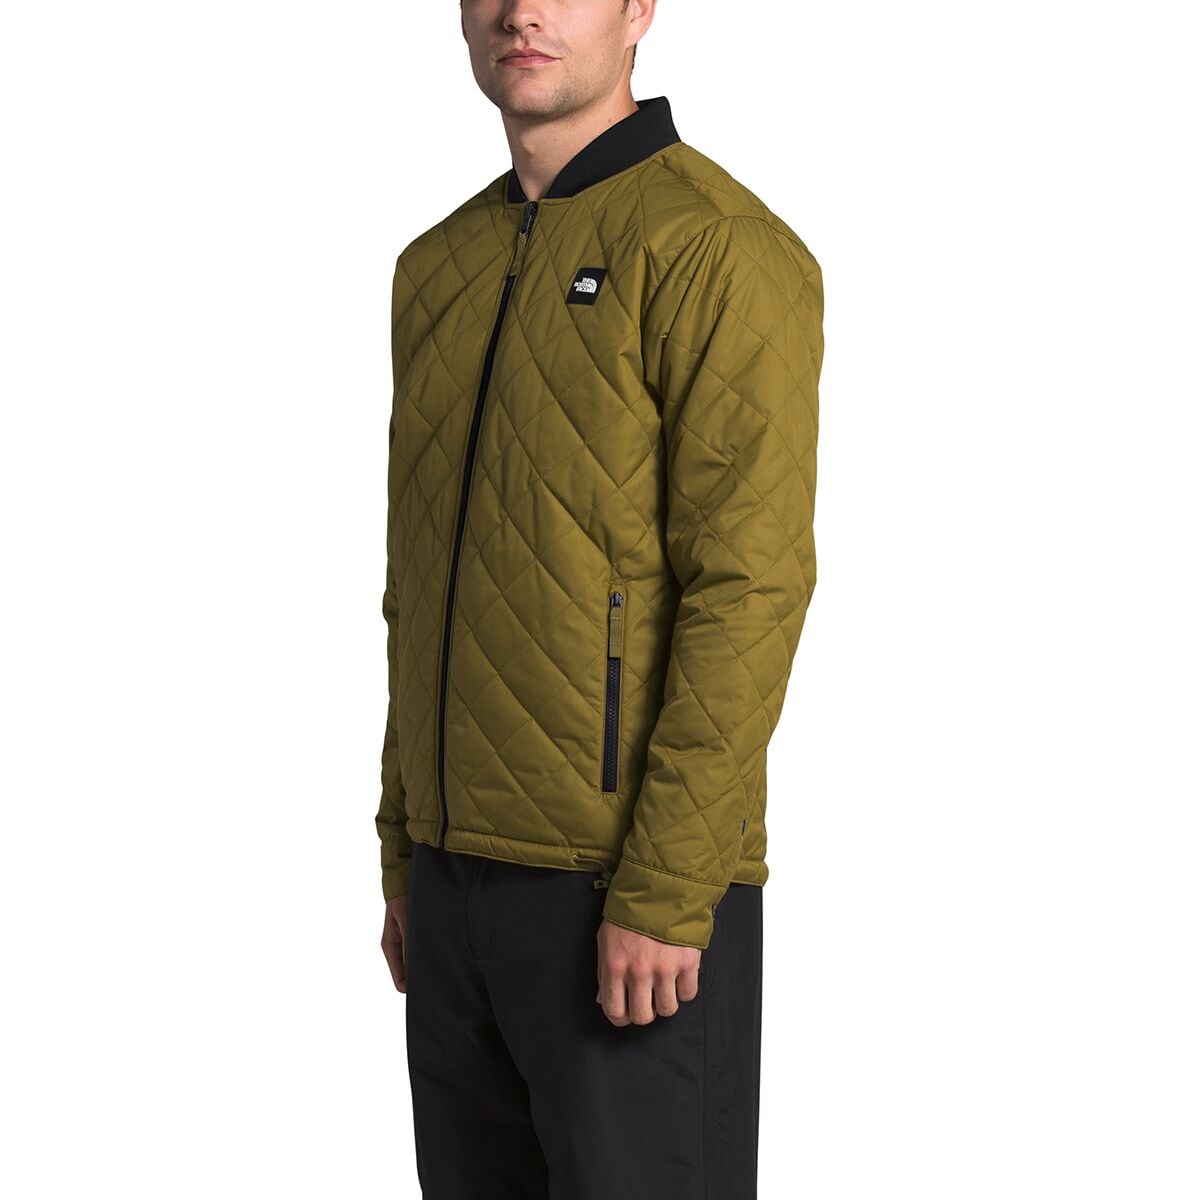 THE NORTH FACE MEN'S JESTER JAKET